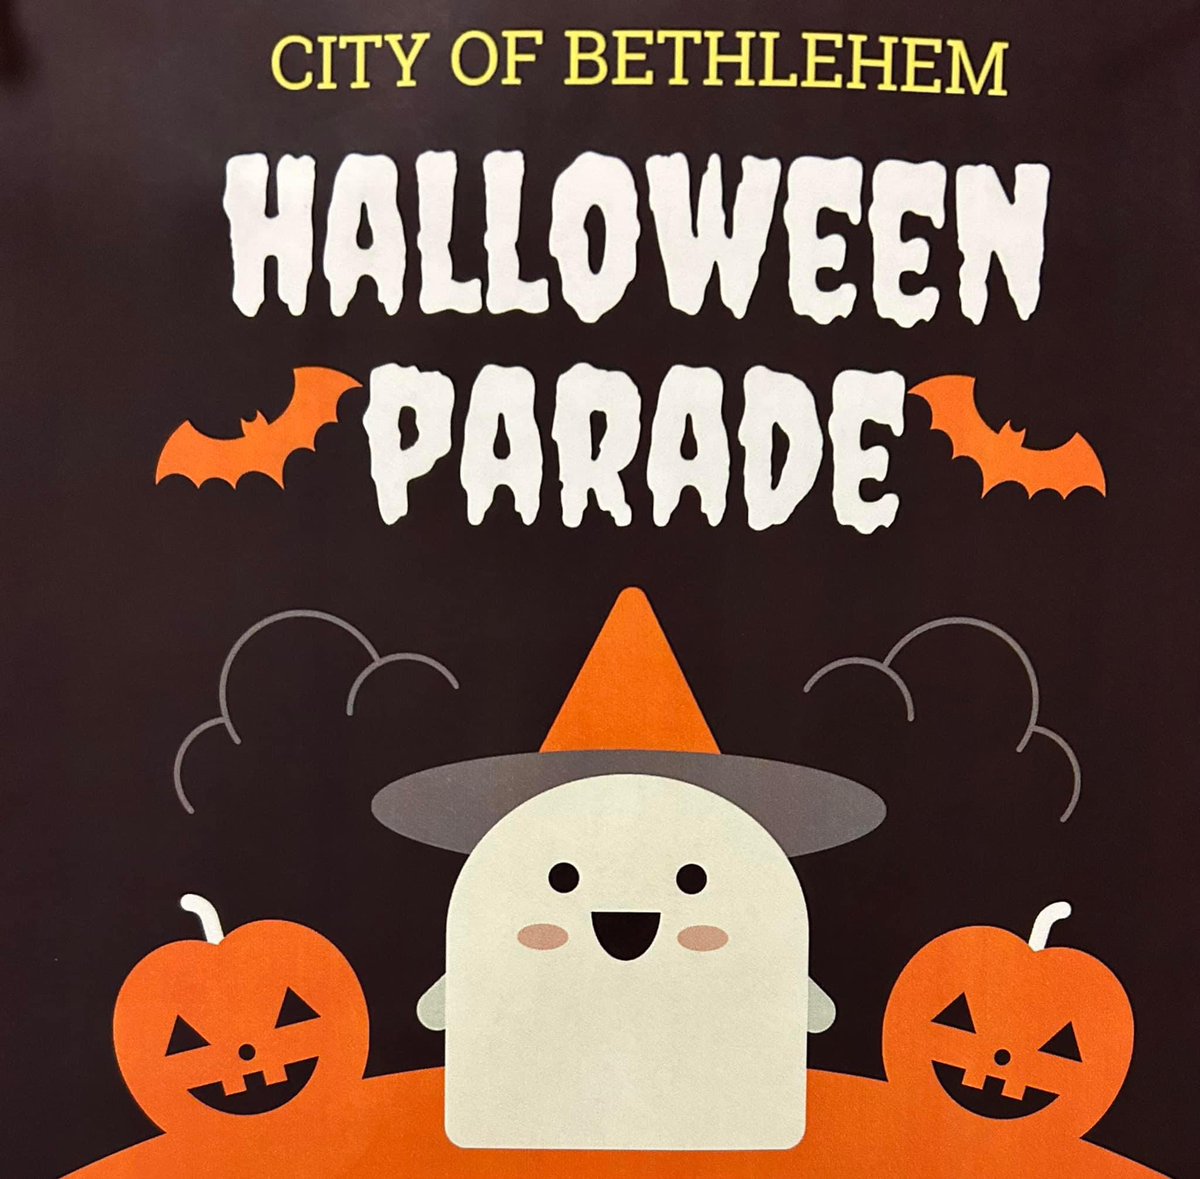 Bethlehem's annual Halloween Parade will be held on Sunday, October 29th, 2023, at 2pm. Once the parade begins, Broad St. from Eighth Ave. to Main St., and Main St., from Broad St. to Spring St., will be closed to traffic. Come on out and join us for a spooky good time! 🎃